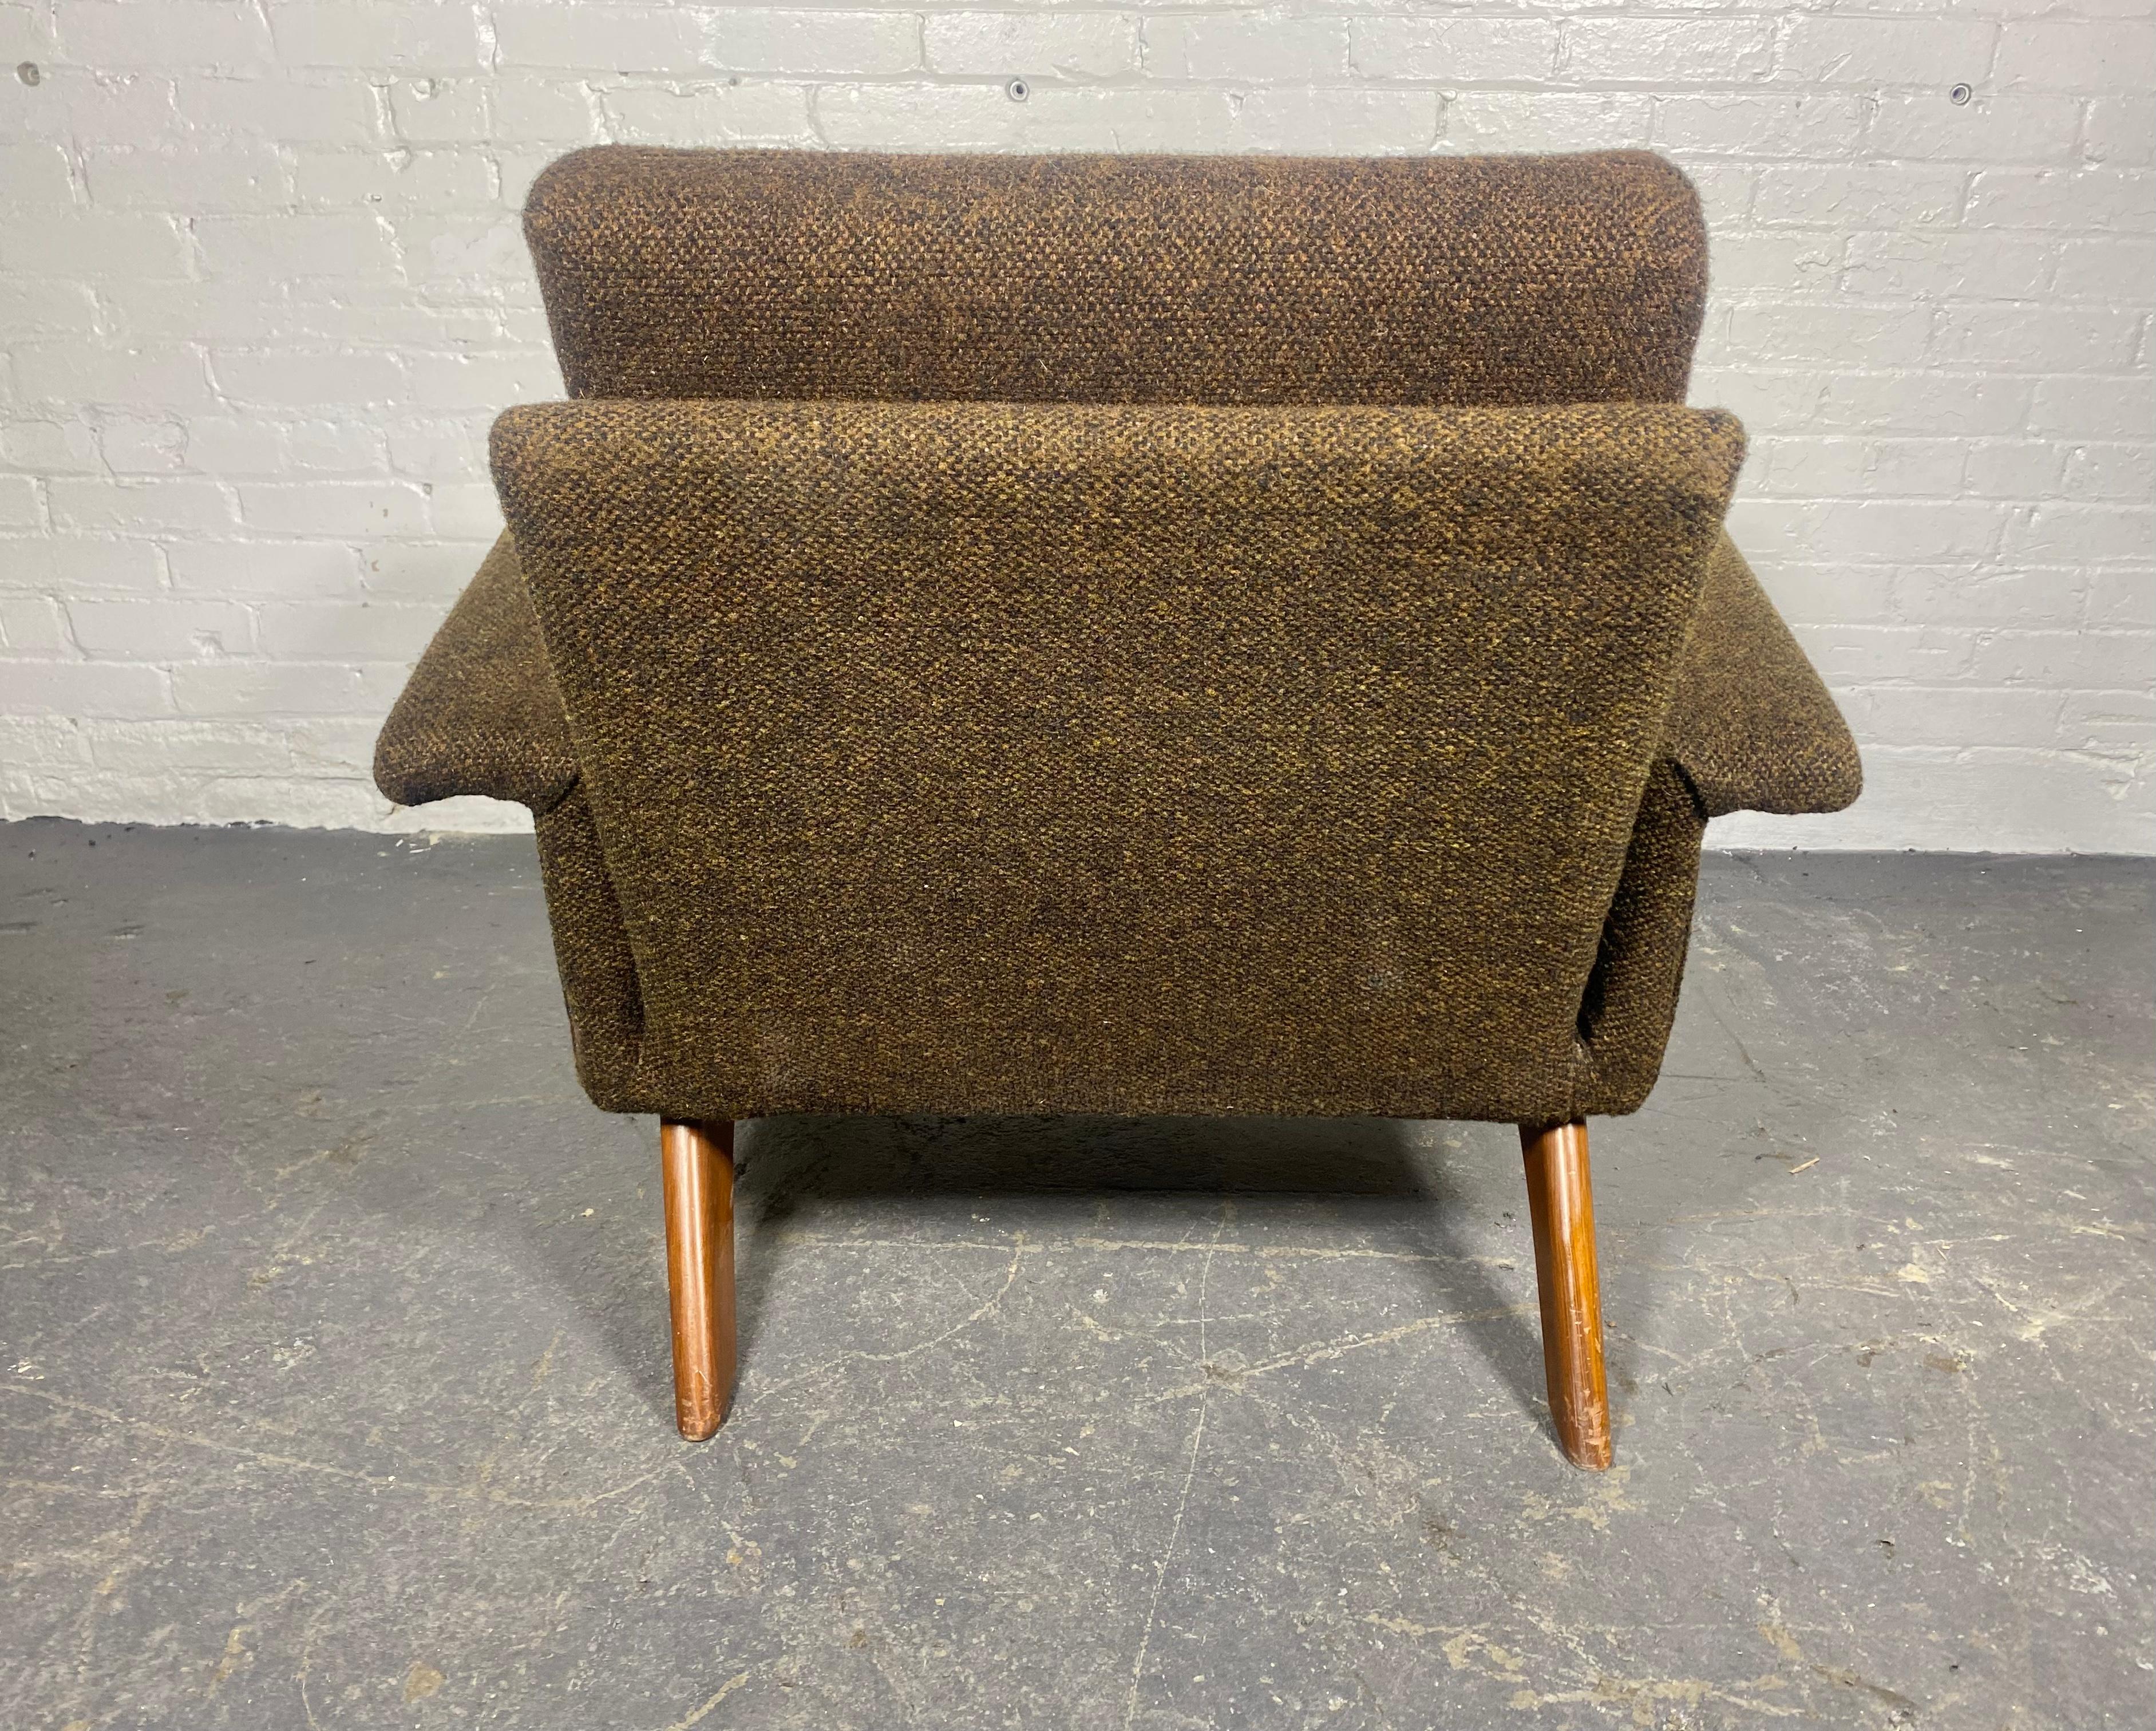 American Dramatic Modernist Lounge Chair by Adrian Pearsall.Sculptural Walnut Base.